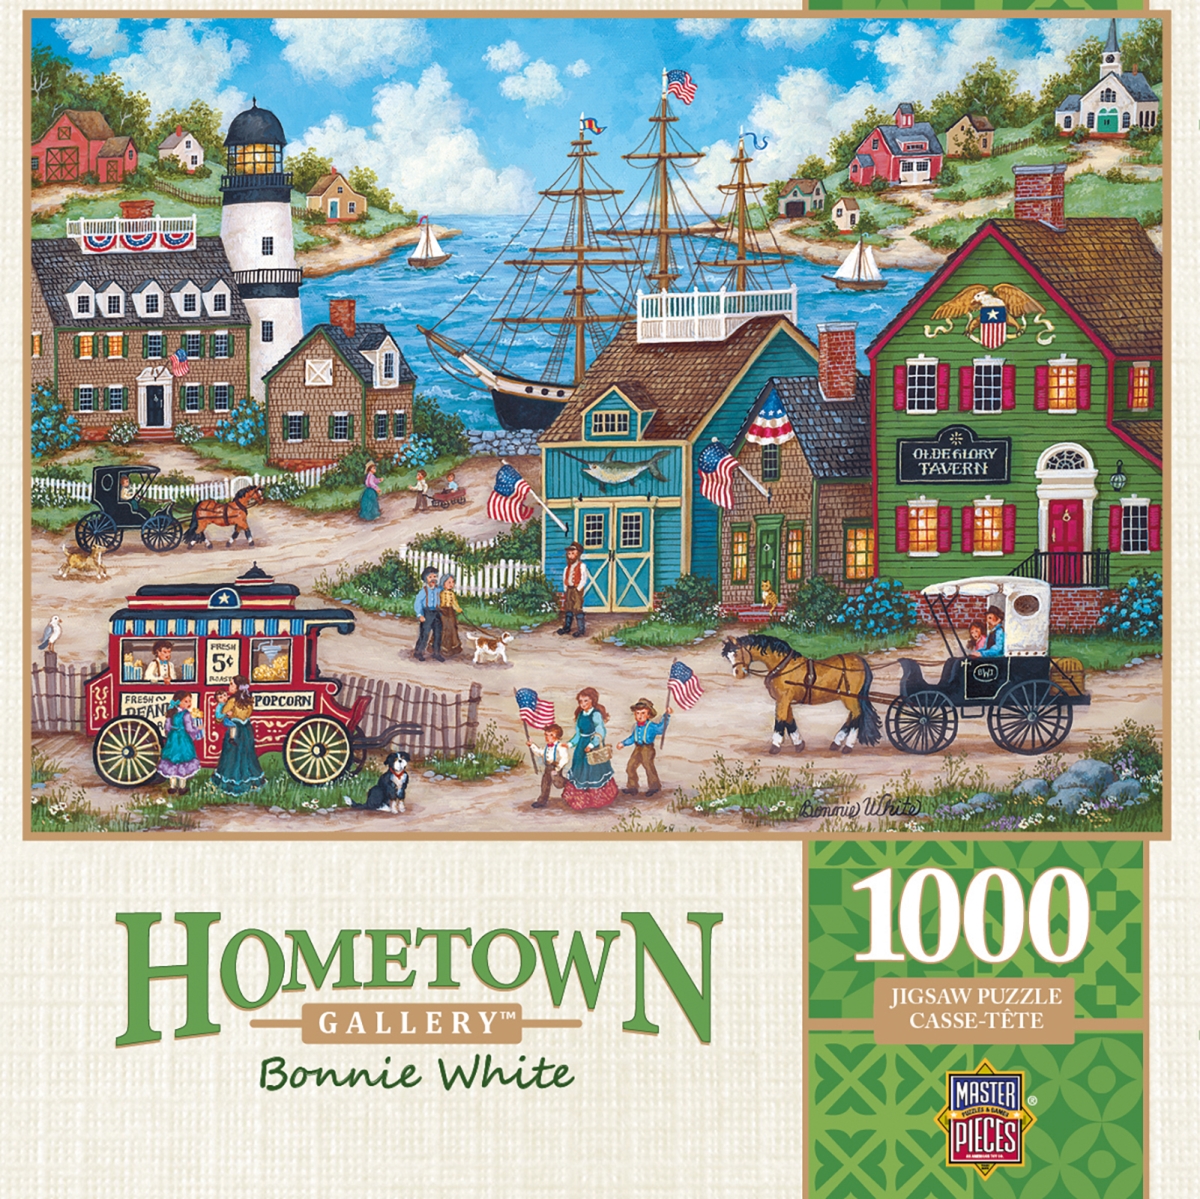 71935 19.25 X 26.75 In. Hometown Gallery The Young Patriots Jigsaw Puzzle - 1000 Piece